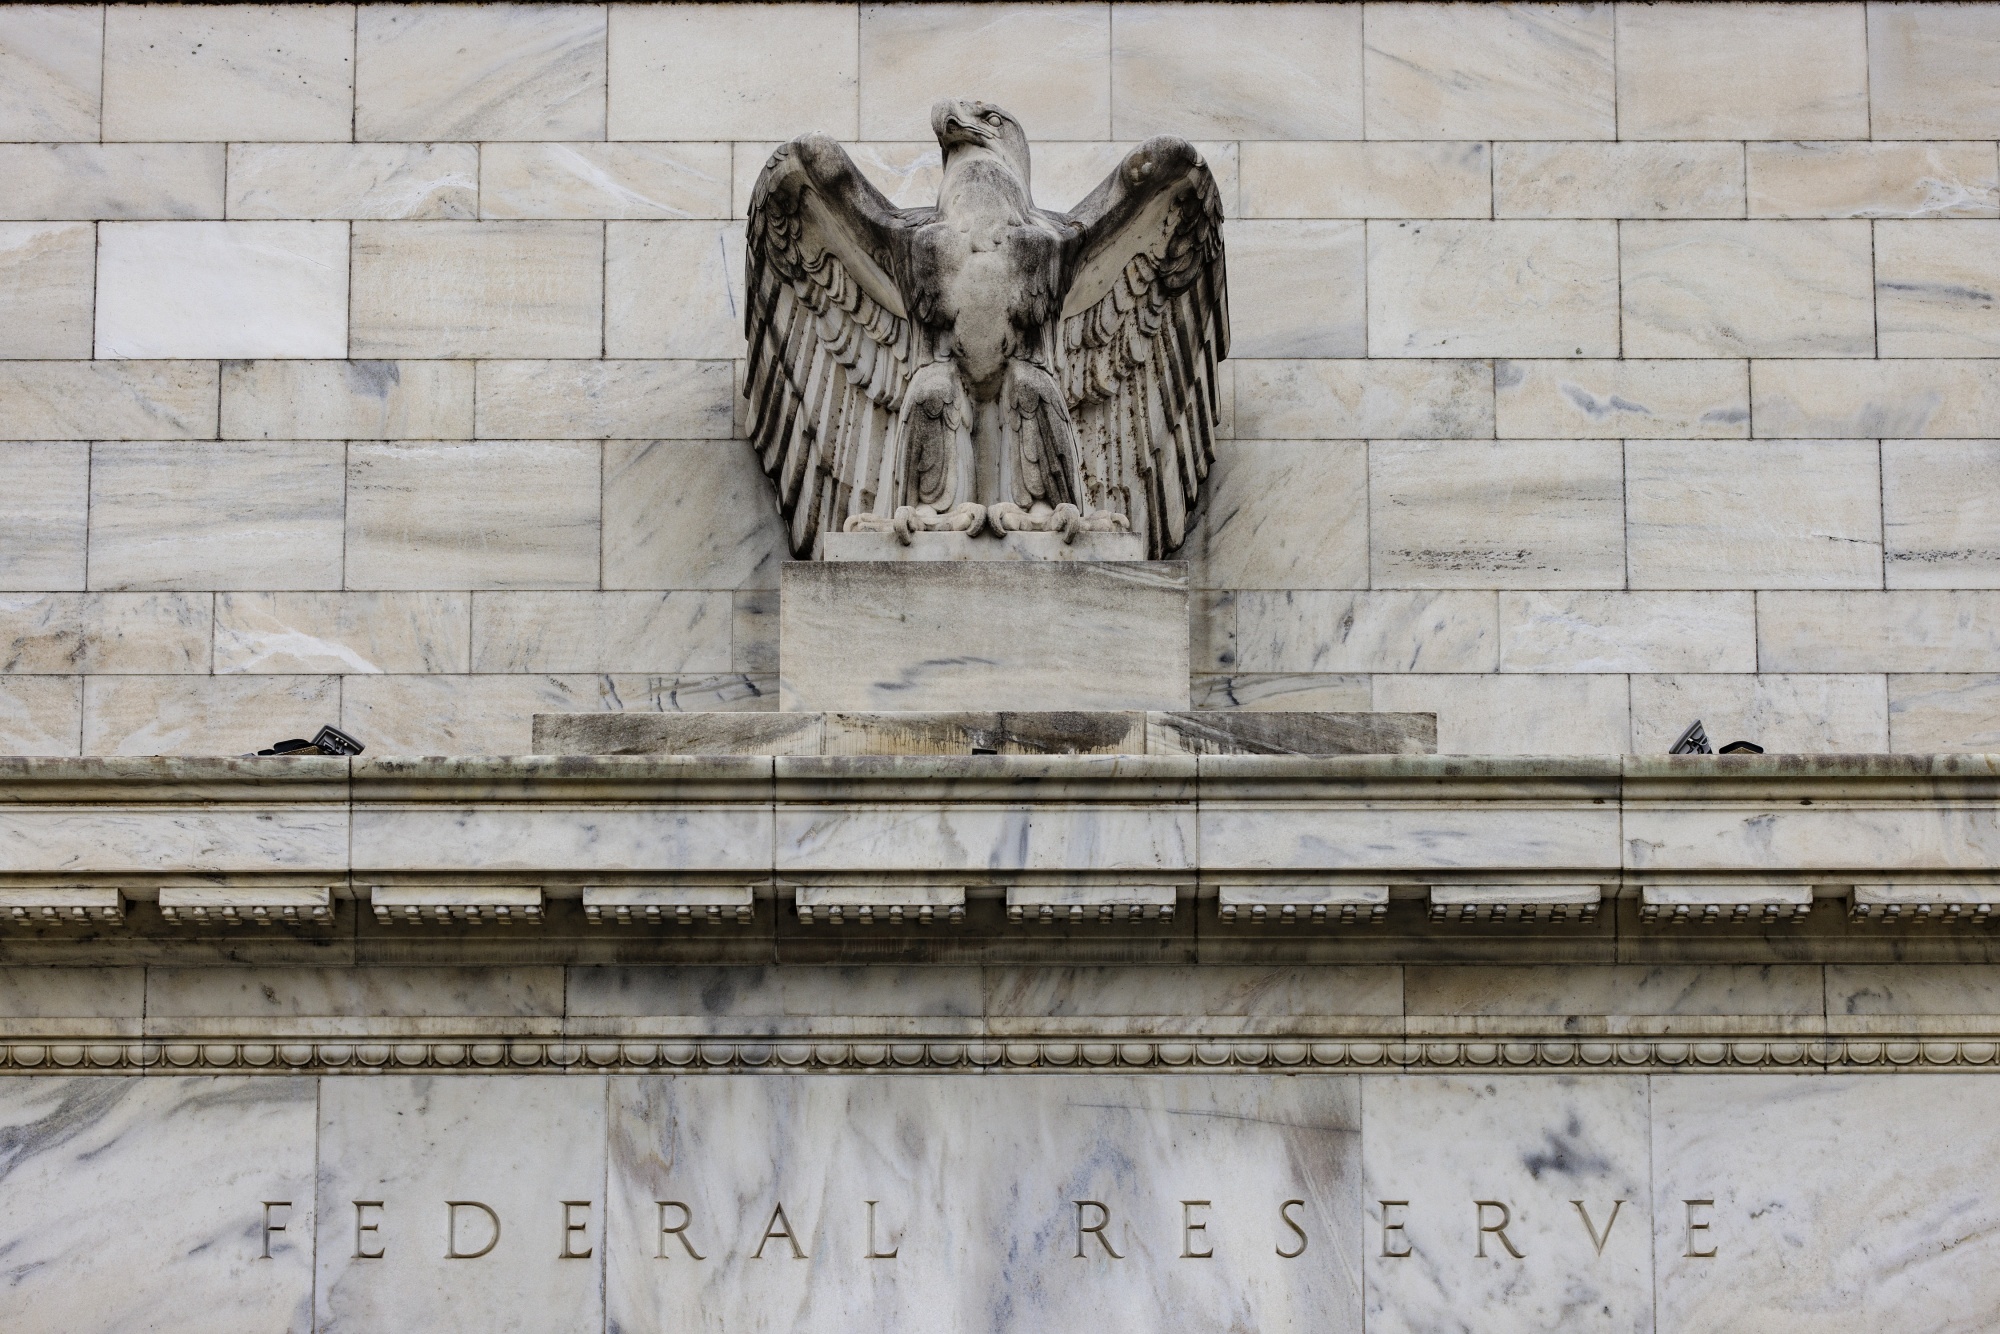 The Fed just unleashed&nbsp;a big, hawkish signal to markets.